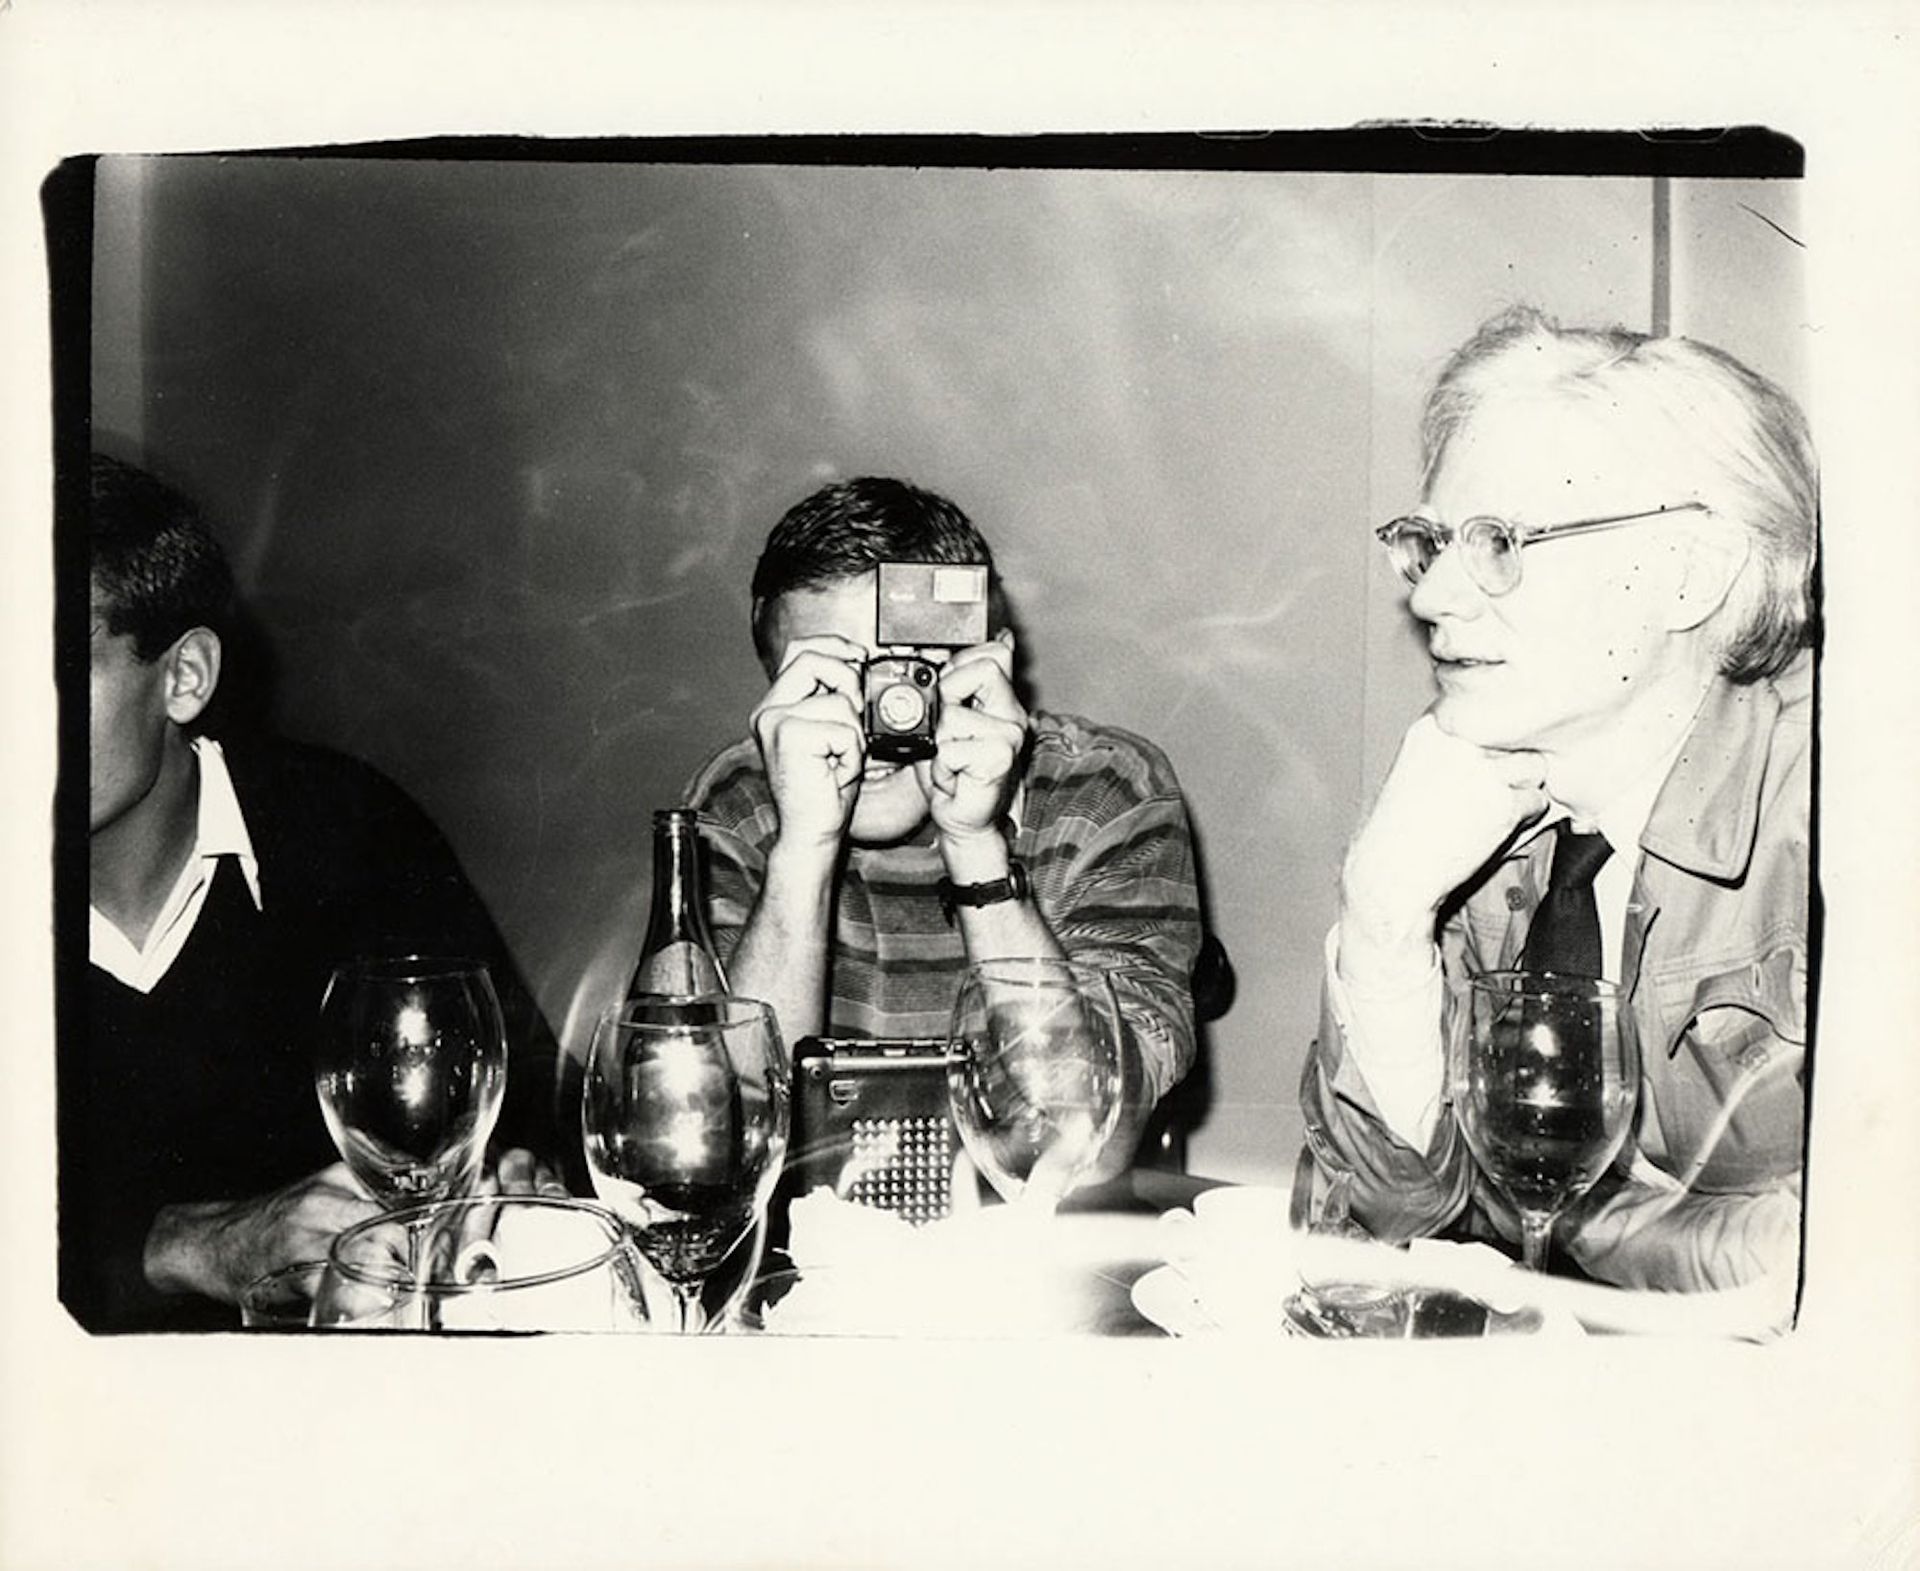 Andy Warhol, Self-portrait with Thomas Ammann, 1979 © The Andy Warhol Foundation for the Visual Arts, Inc.